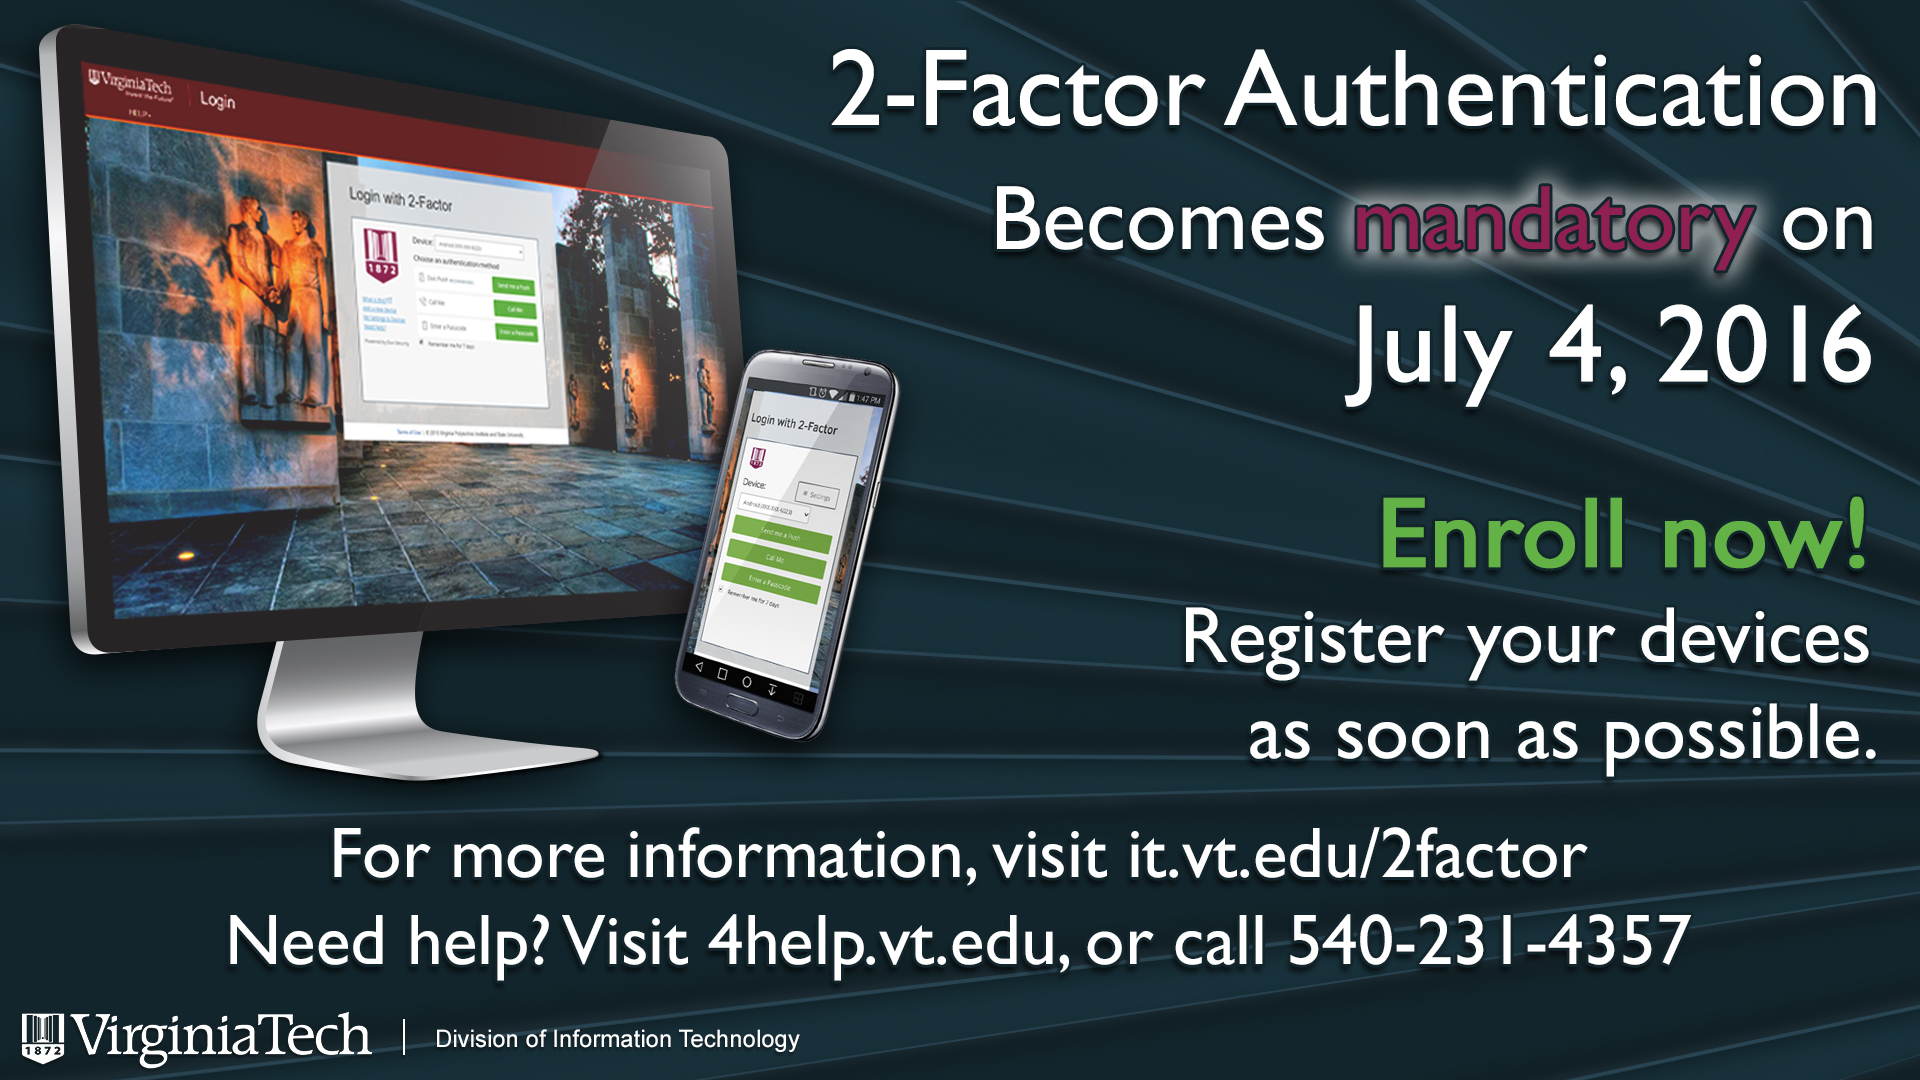 2-Factor Authentication will become mandatory for all students, faculty, and staff at Virginia Tech on July 4th, 2016.